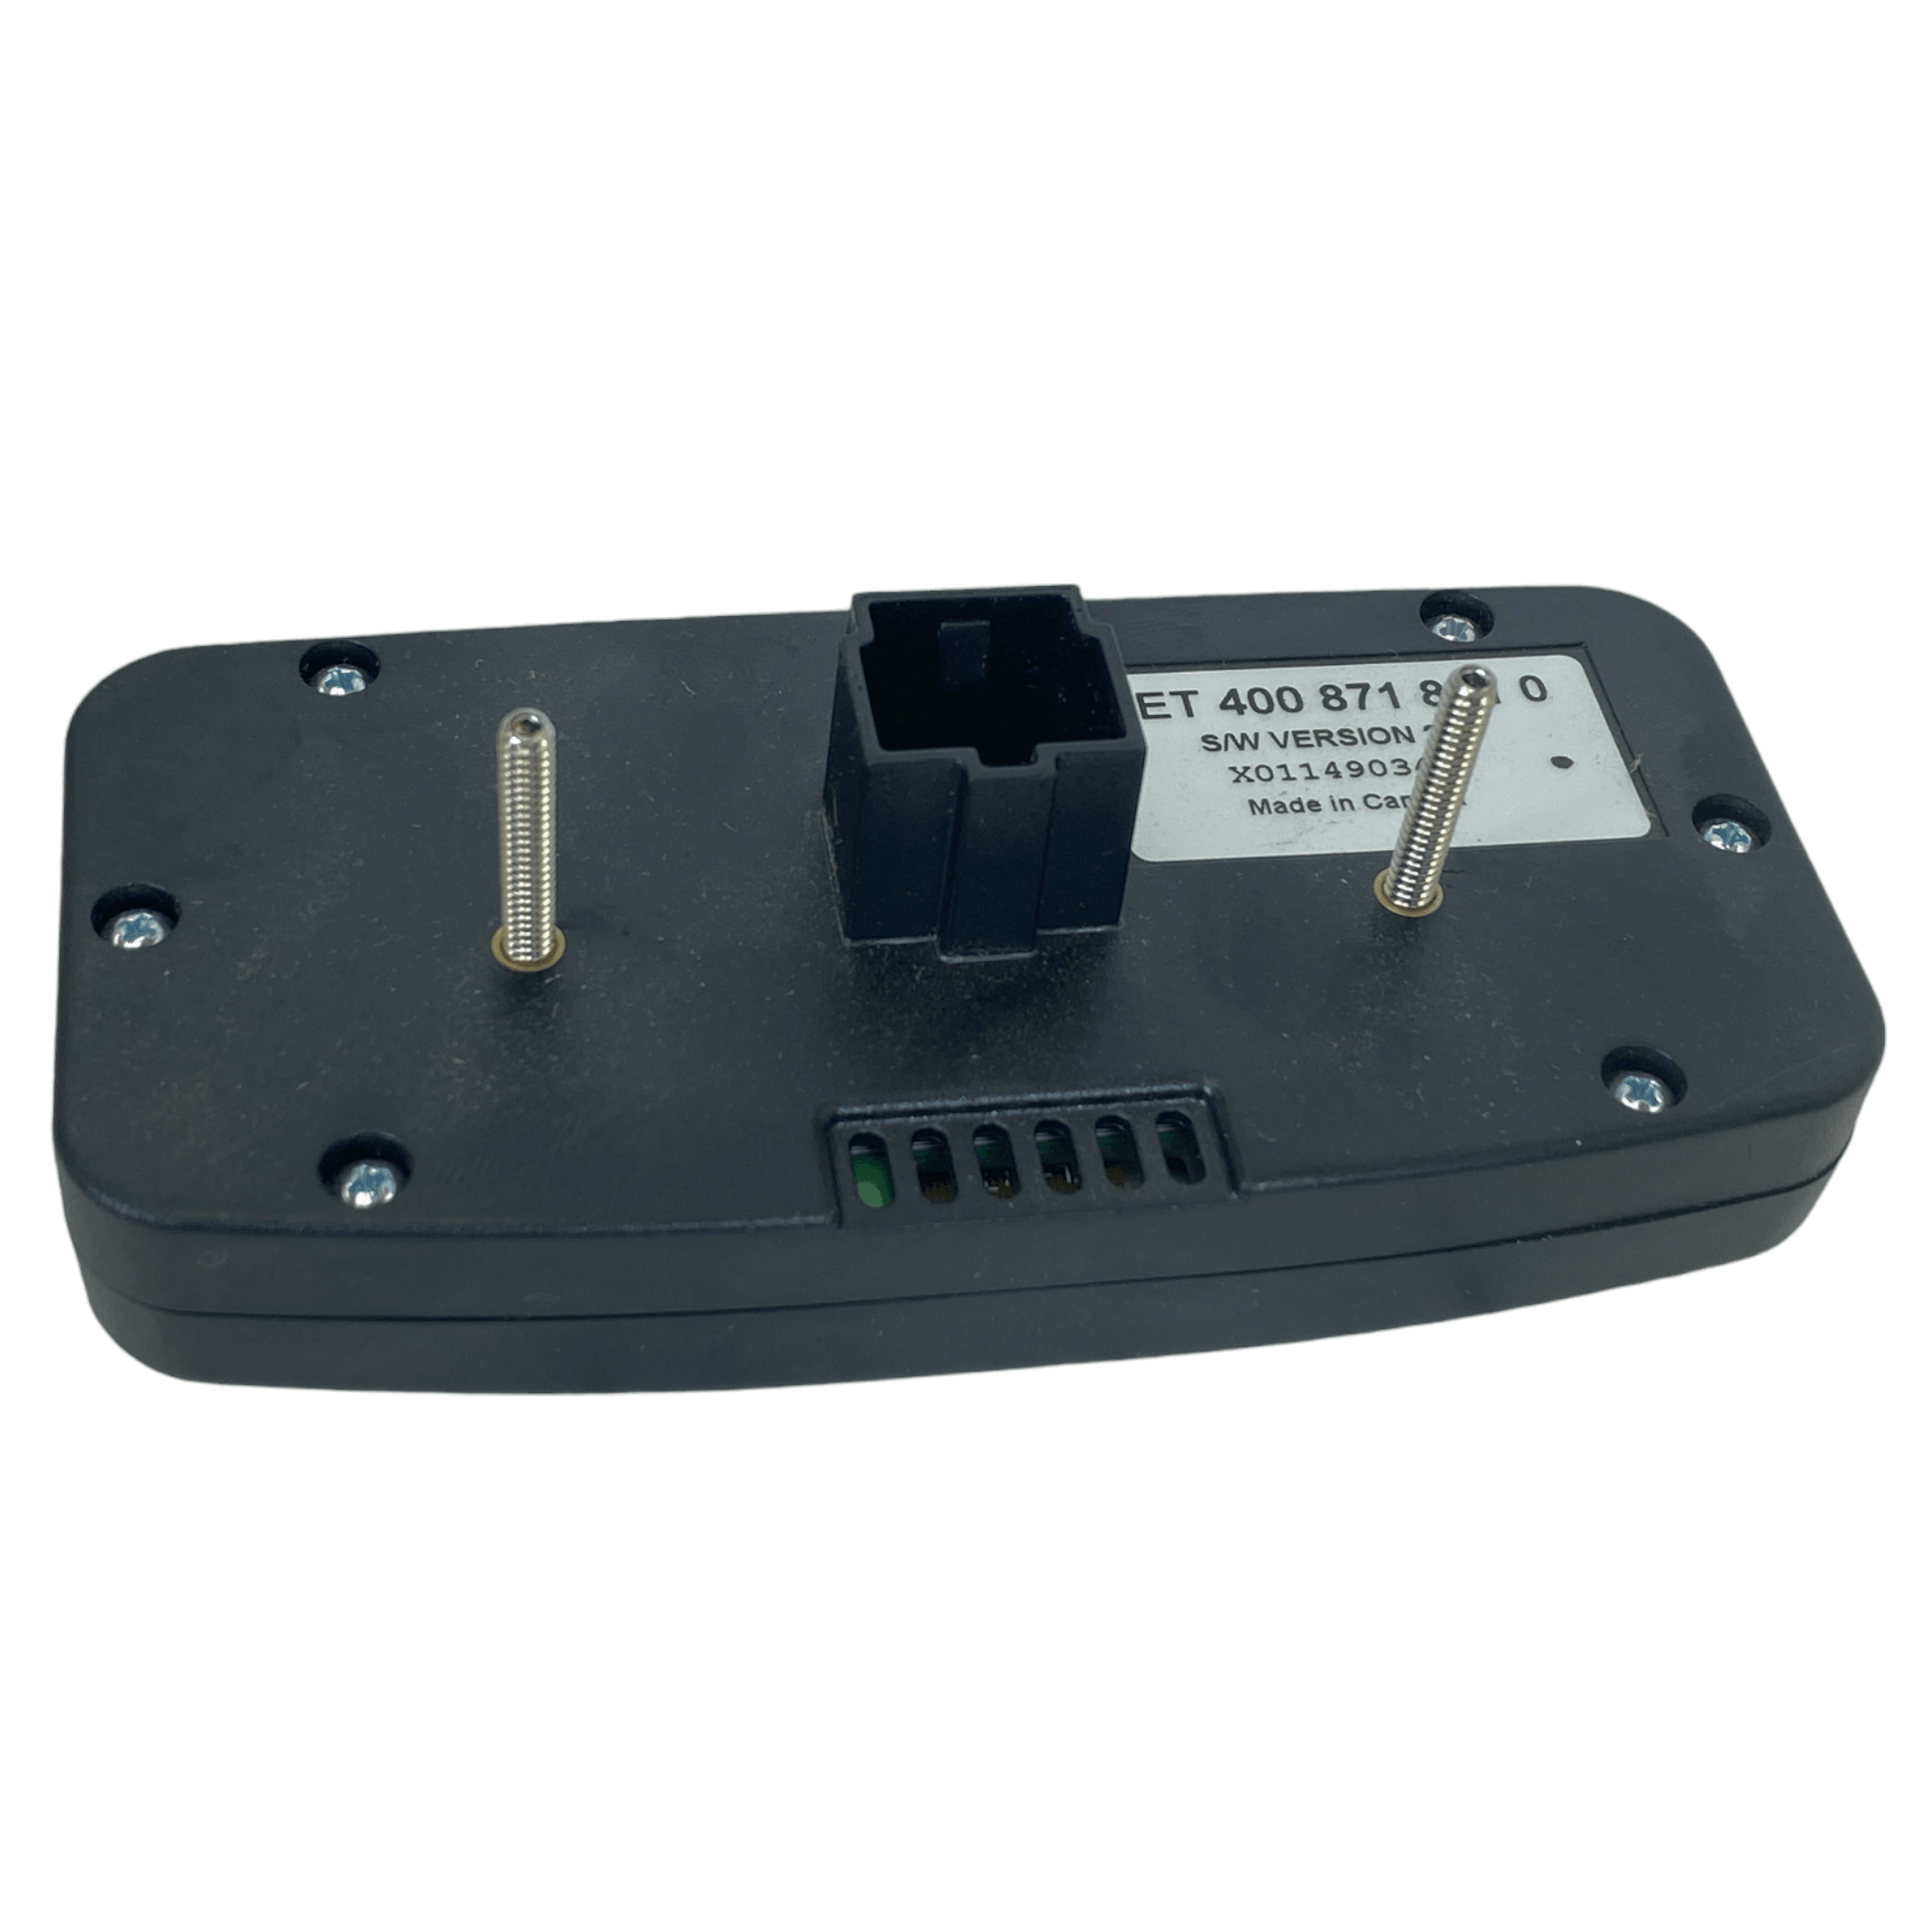 S4008718010 Genuine Meritor Wabco Abs Ongaurd Display Module For Freightliner - ADVANCED TRUCK PARTS